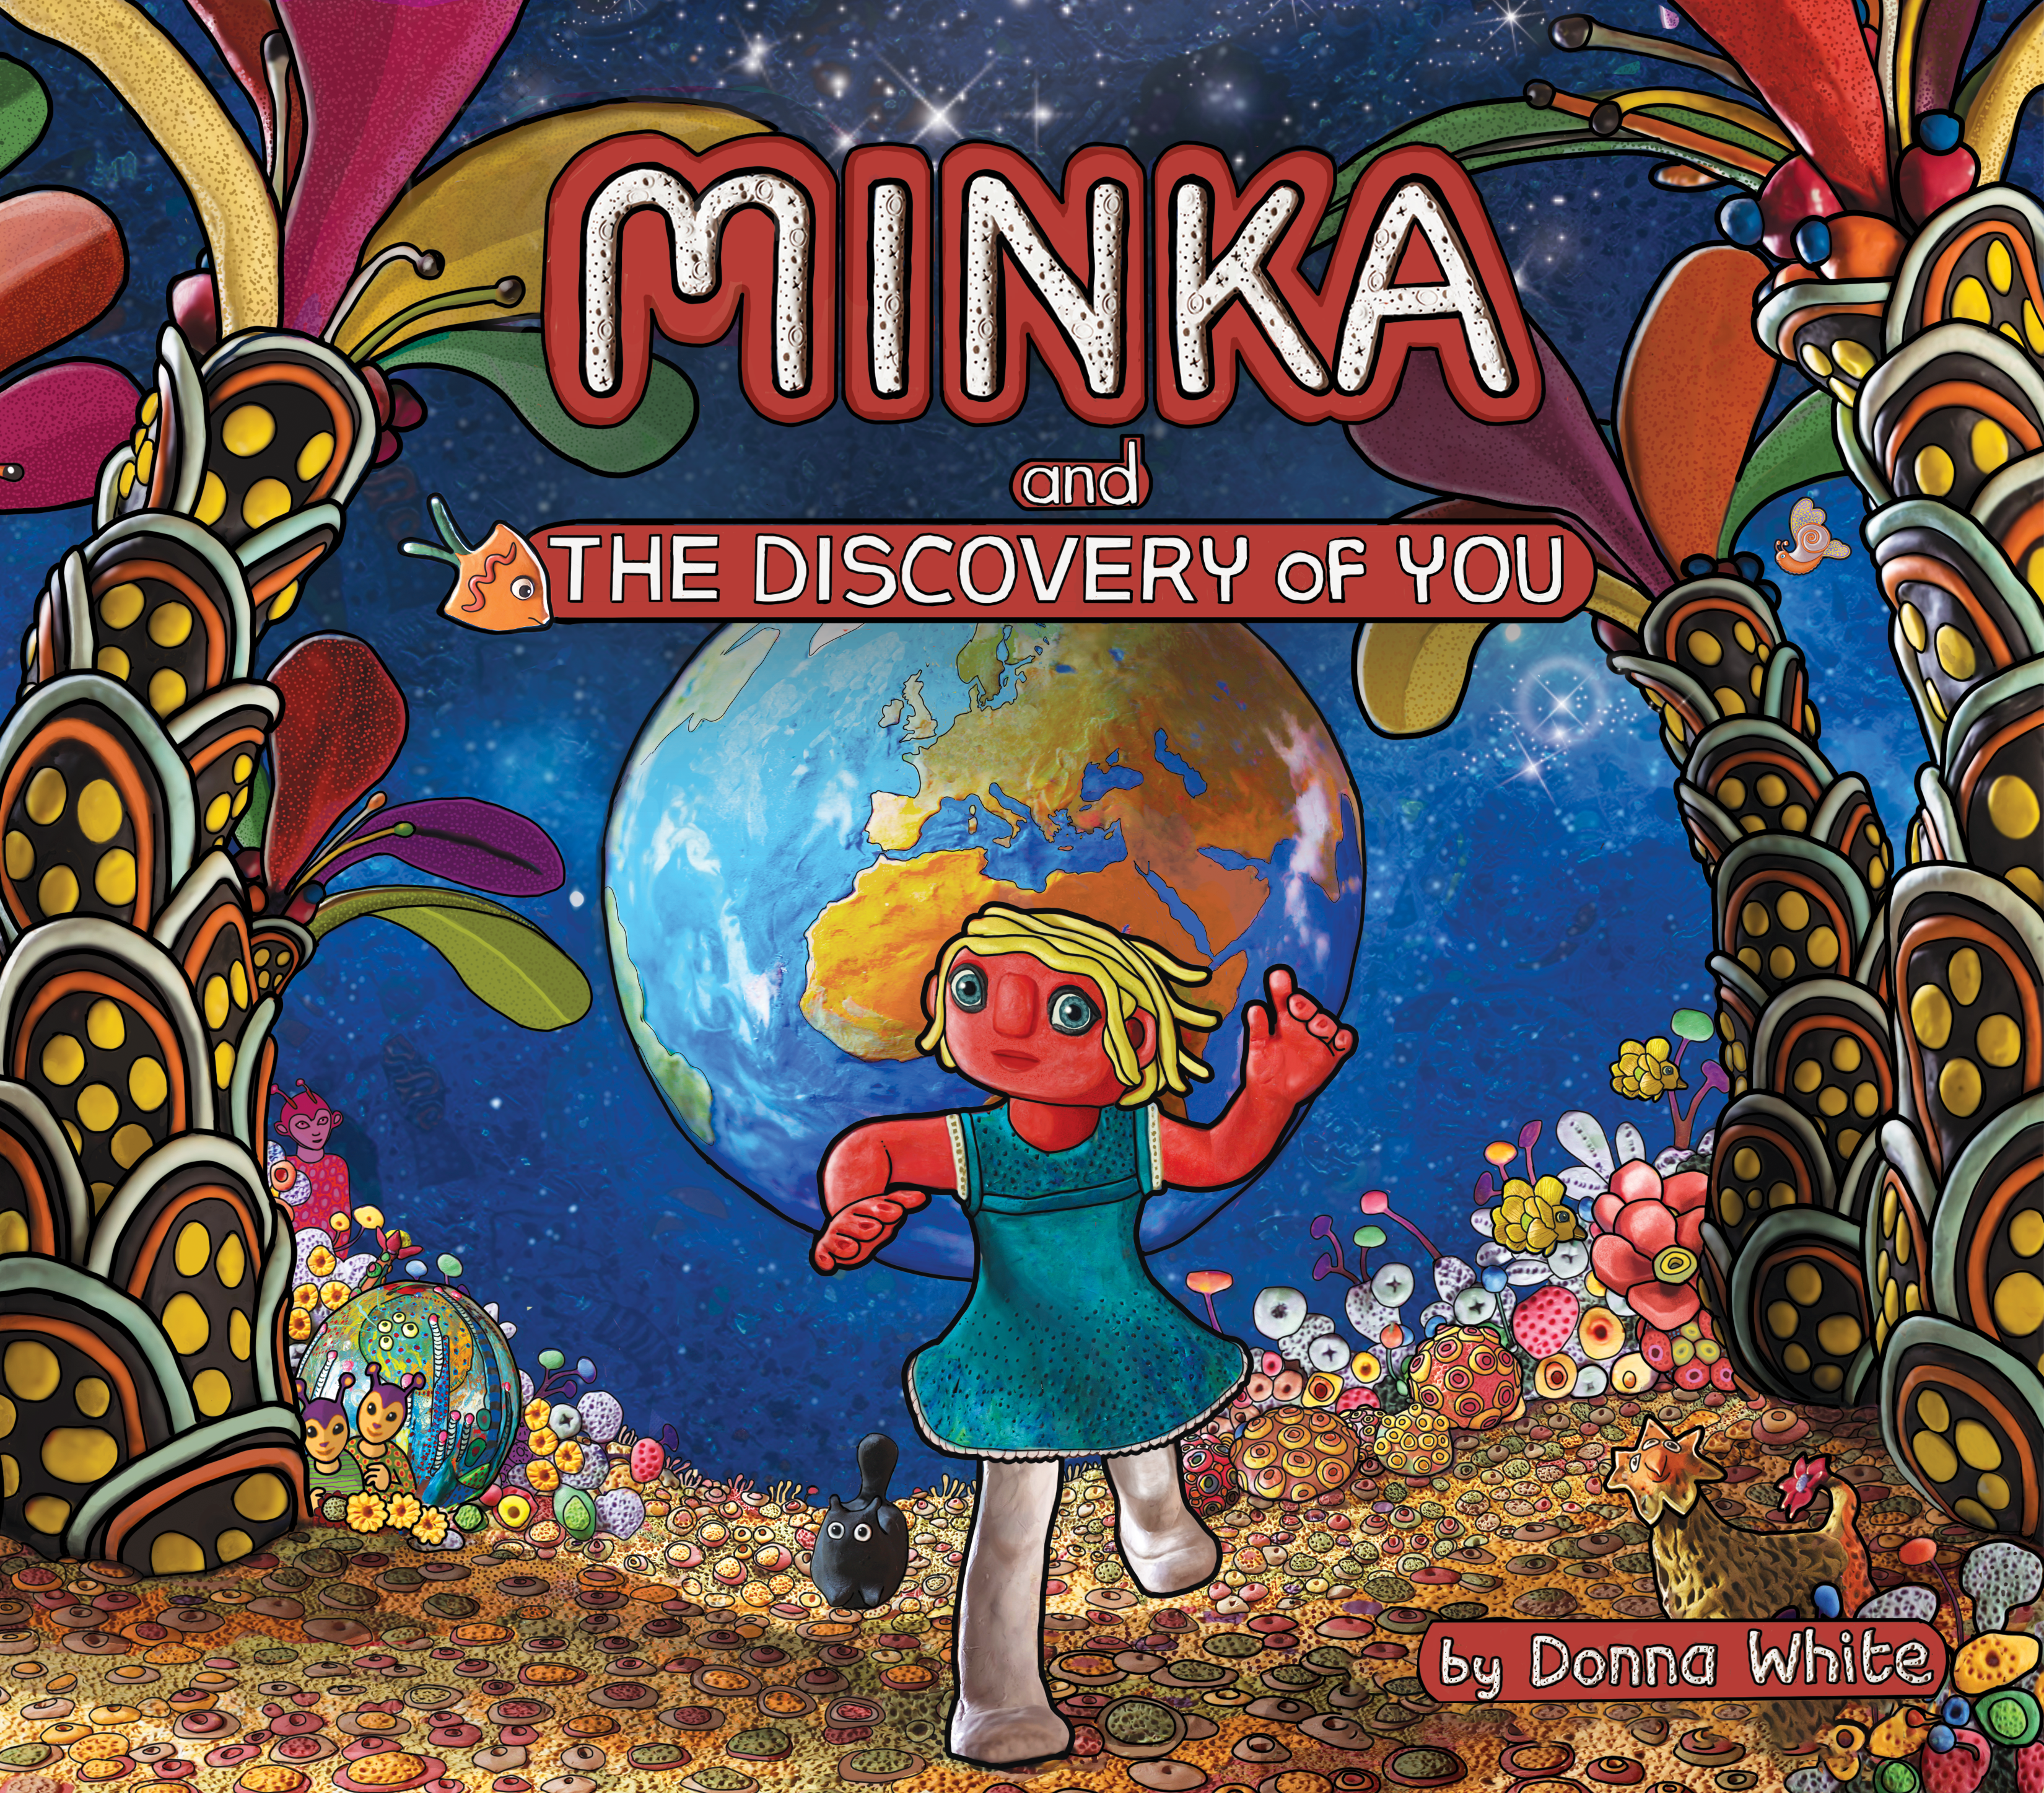 Minka and the Discovery of YOU - EBook Digital Download